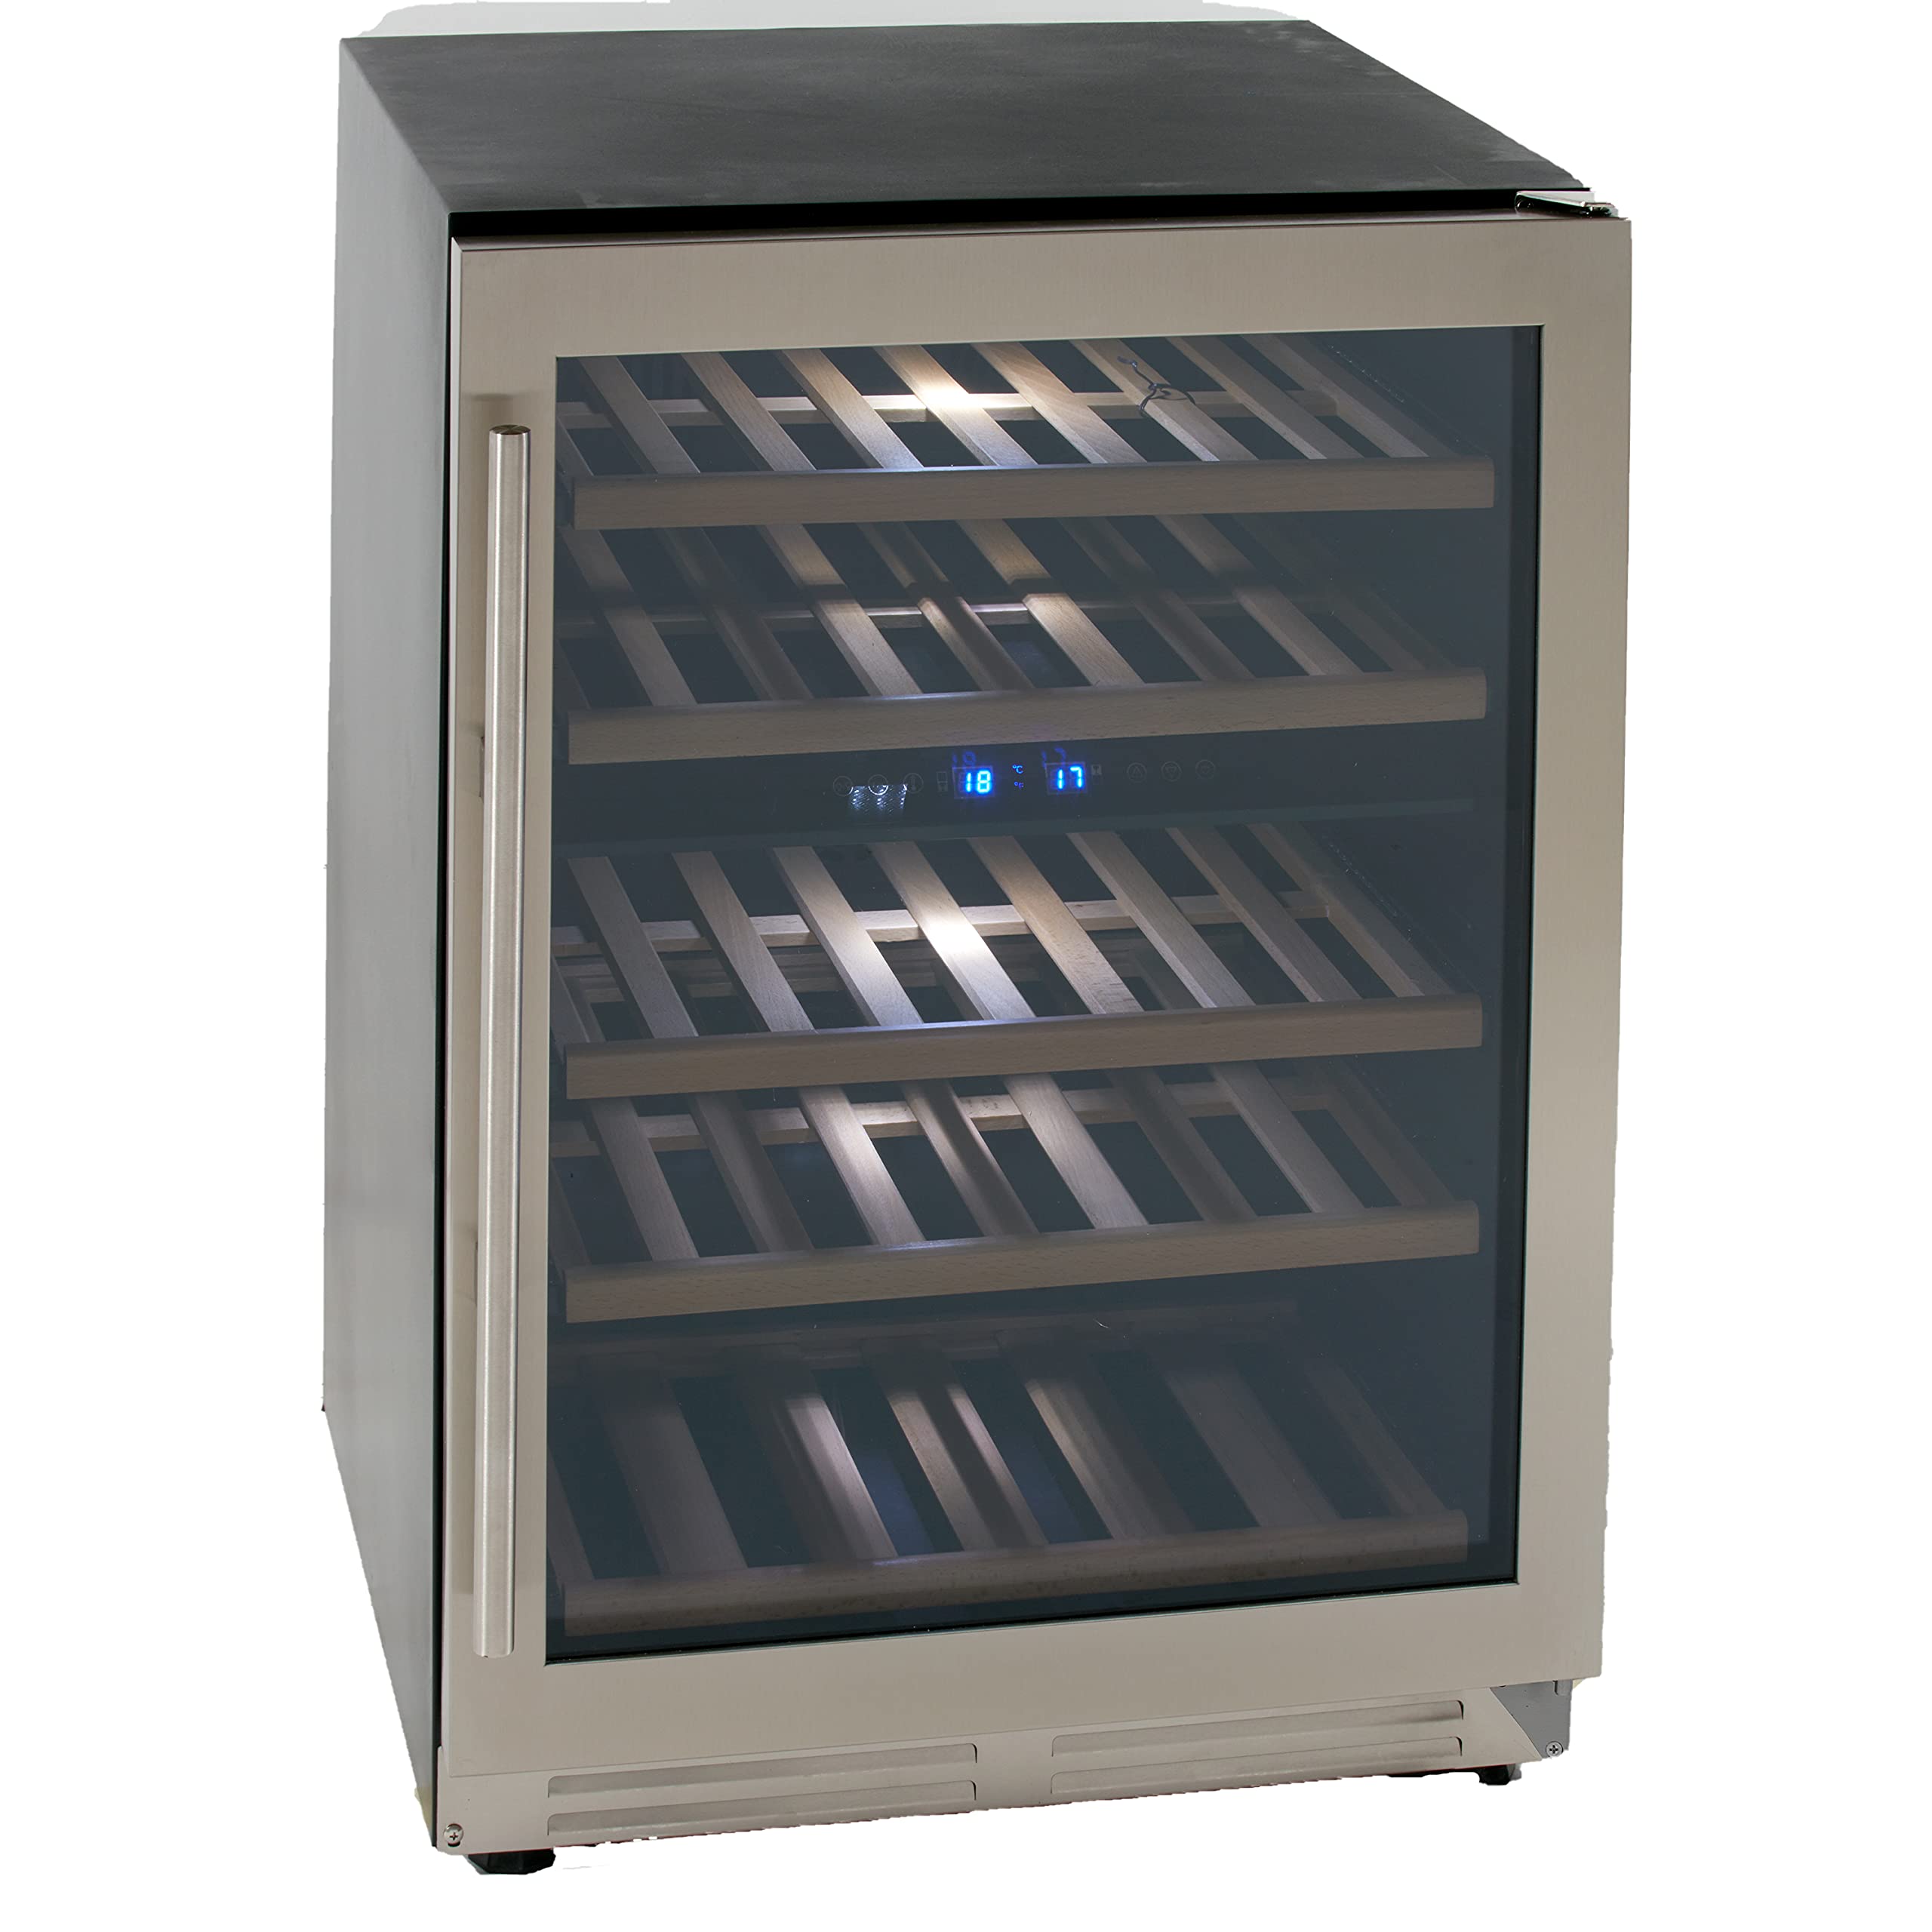 Avanti WCF43S3SD Wine Cooler Designer Series Freestanding Dual Zone with Reversible Door and LED Lighting Holds Up to 43 Bottles